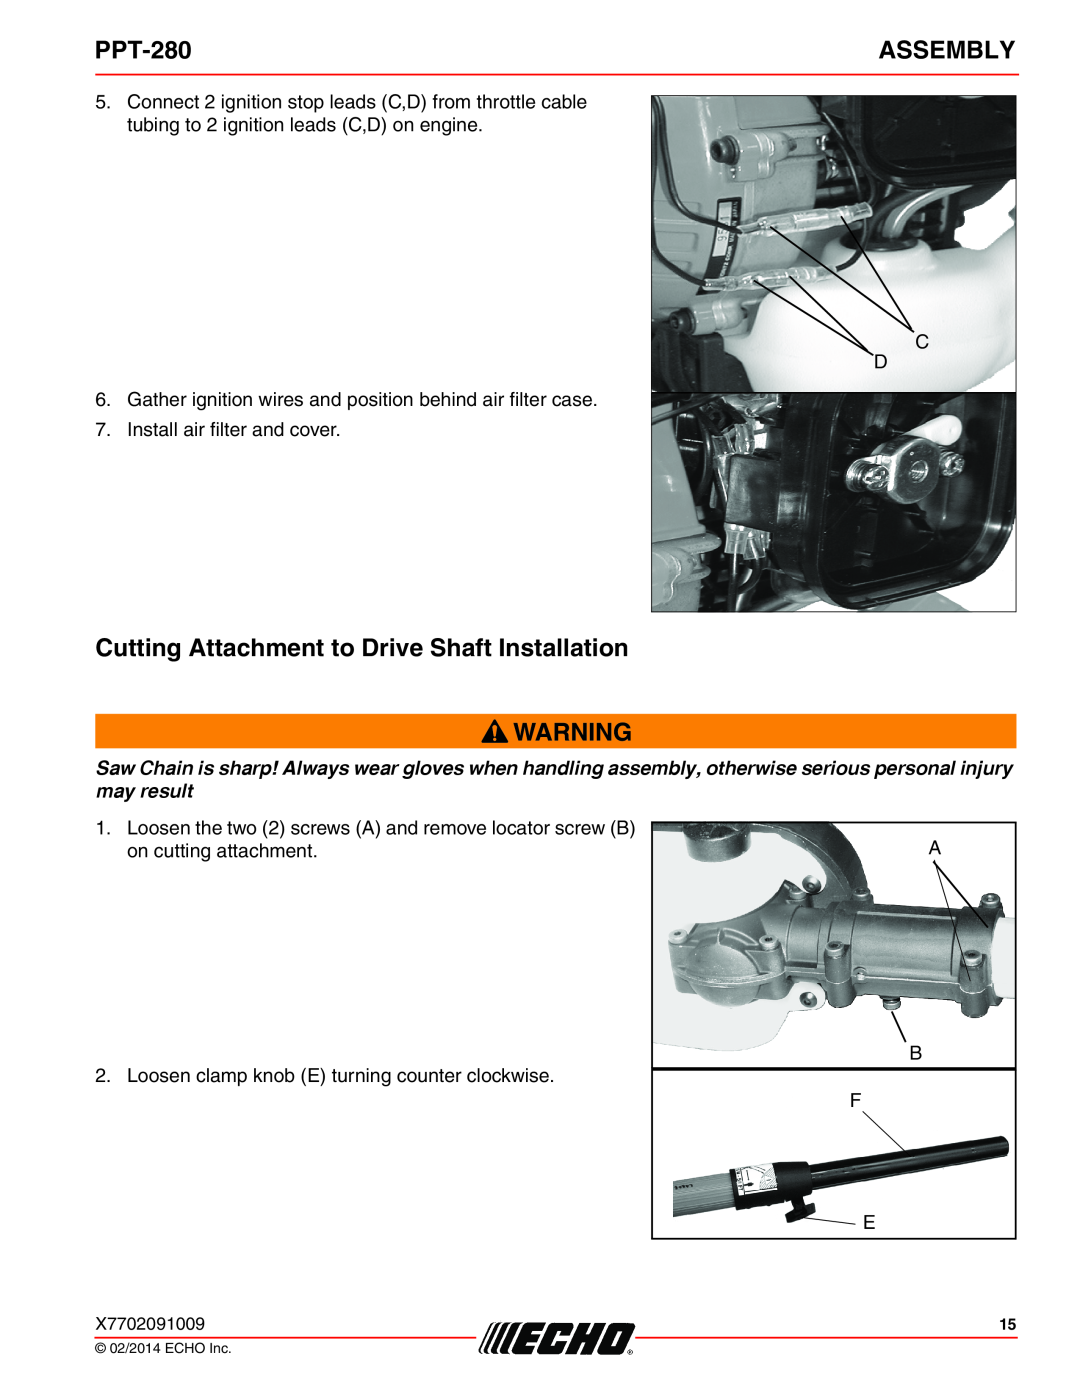 Echo PPT-280 specifications Cutting Attachment to Drive Shaft Installation, Assembly 